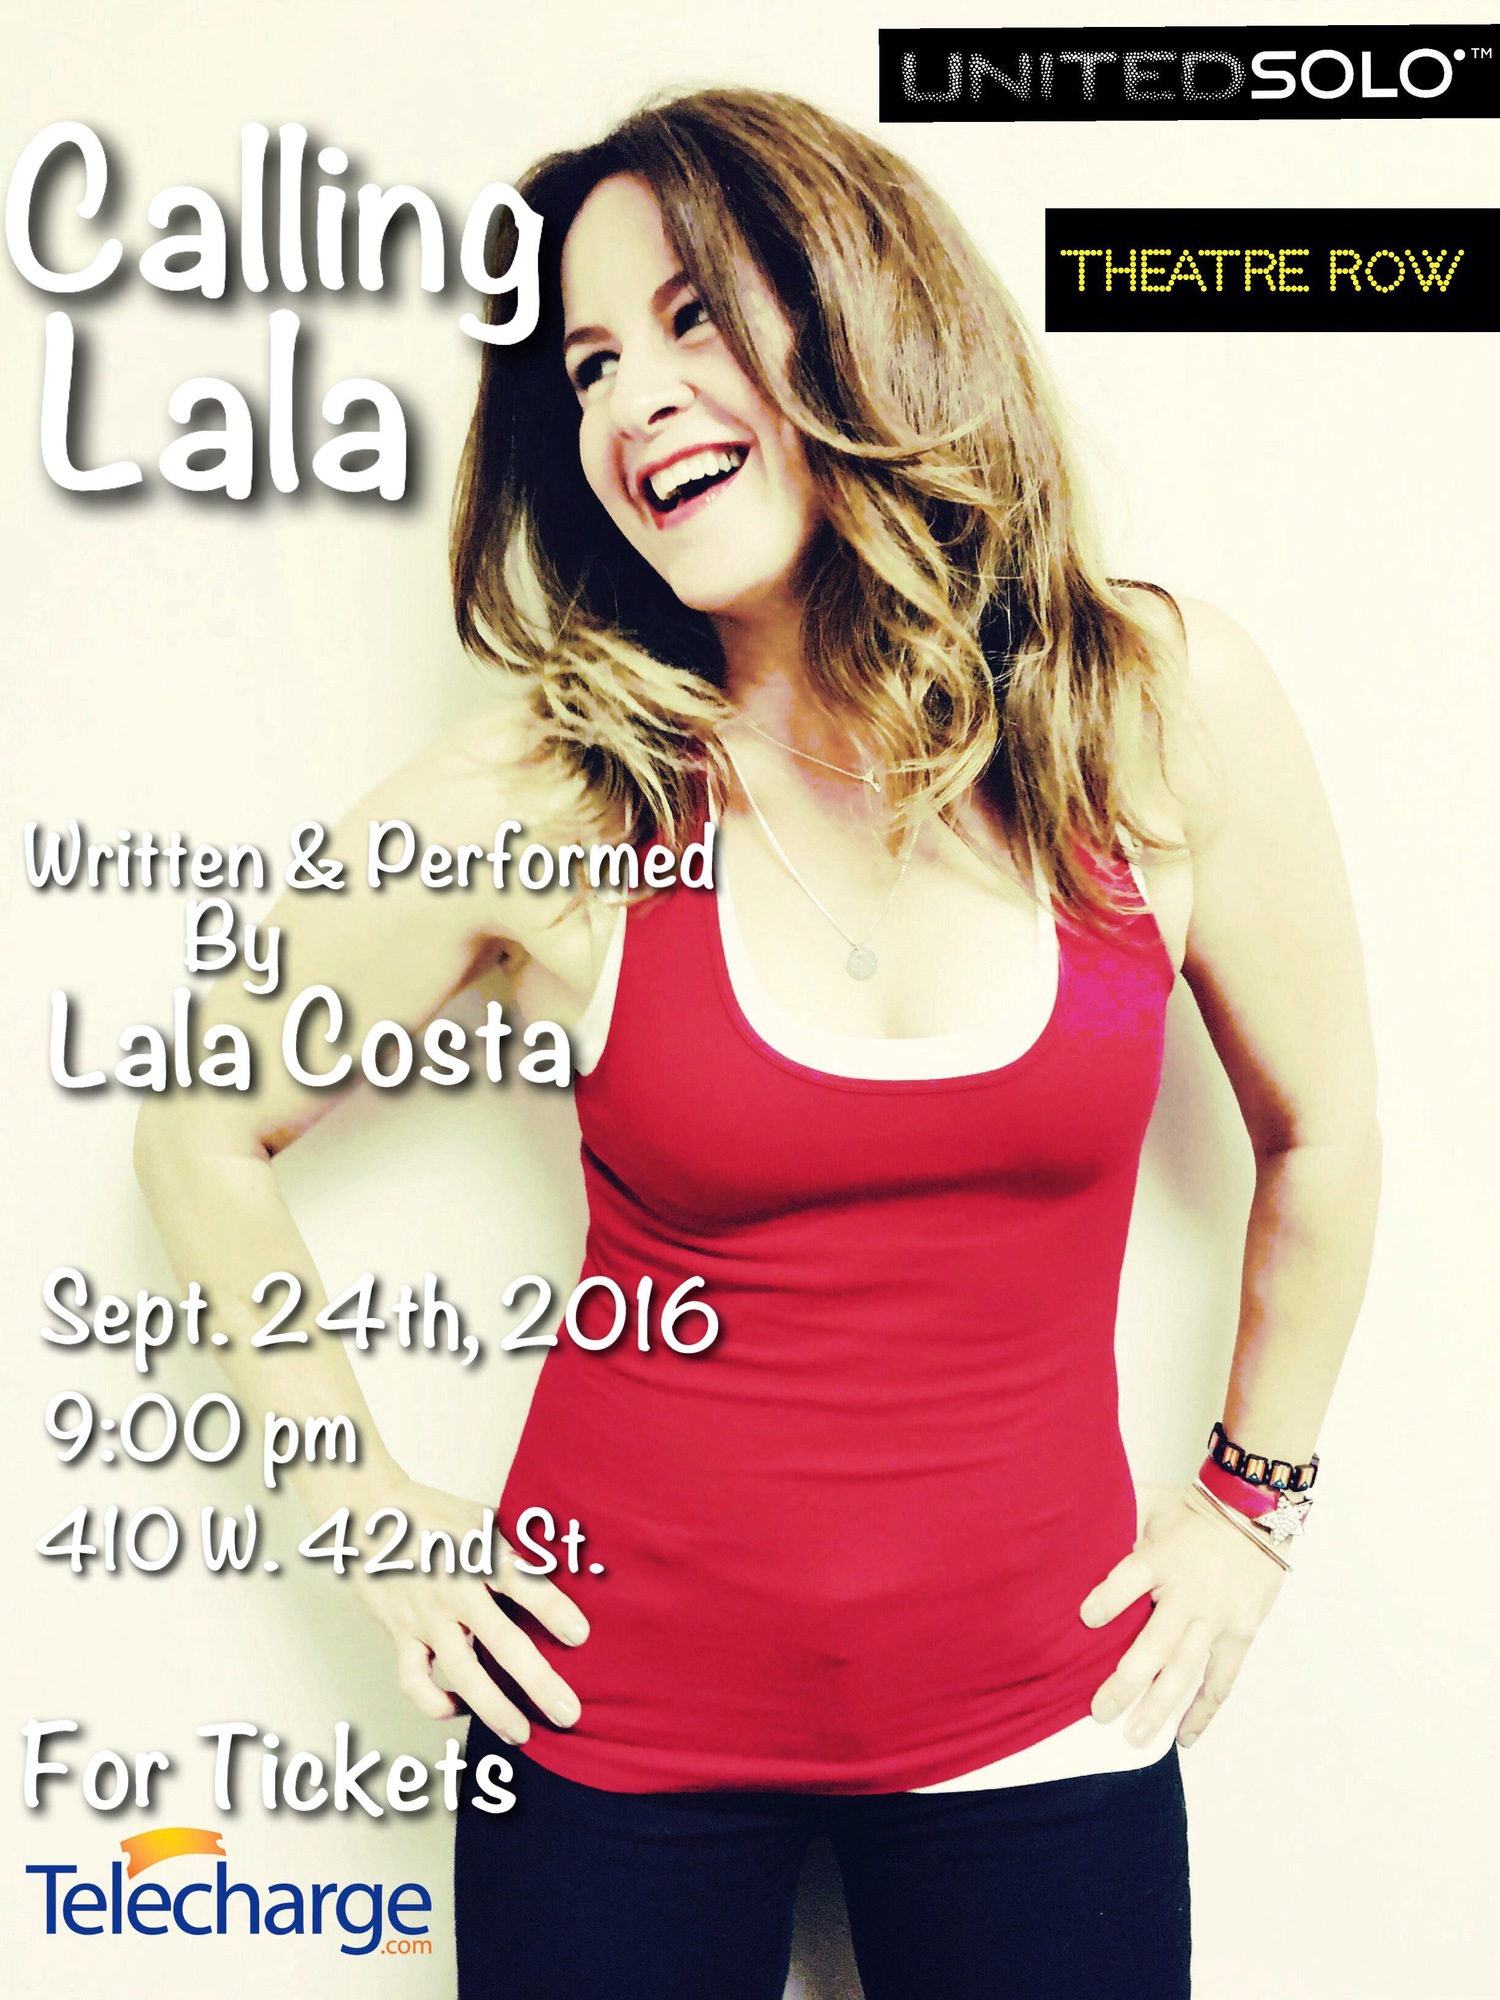 Calling Lala! Written & Performed by Lala Costa.